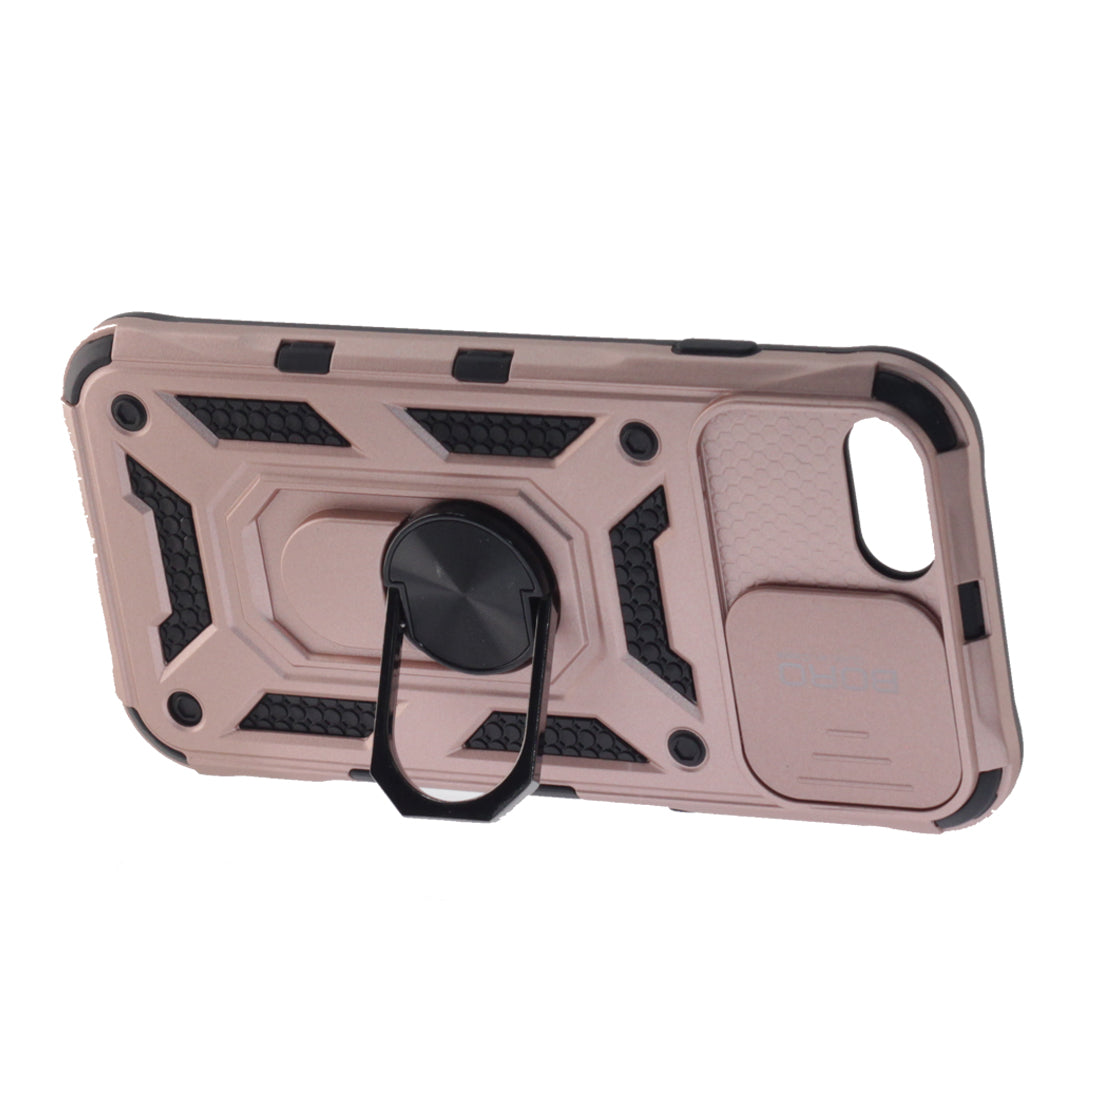 iPhone 6/7/8/SE 2020 Case, Magnetic Ring Armor Case with Lens Cover, Color Rose Gold